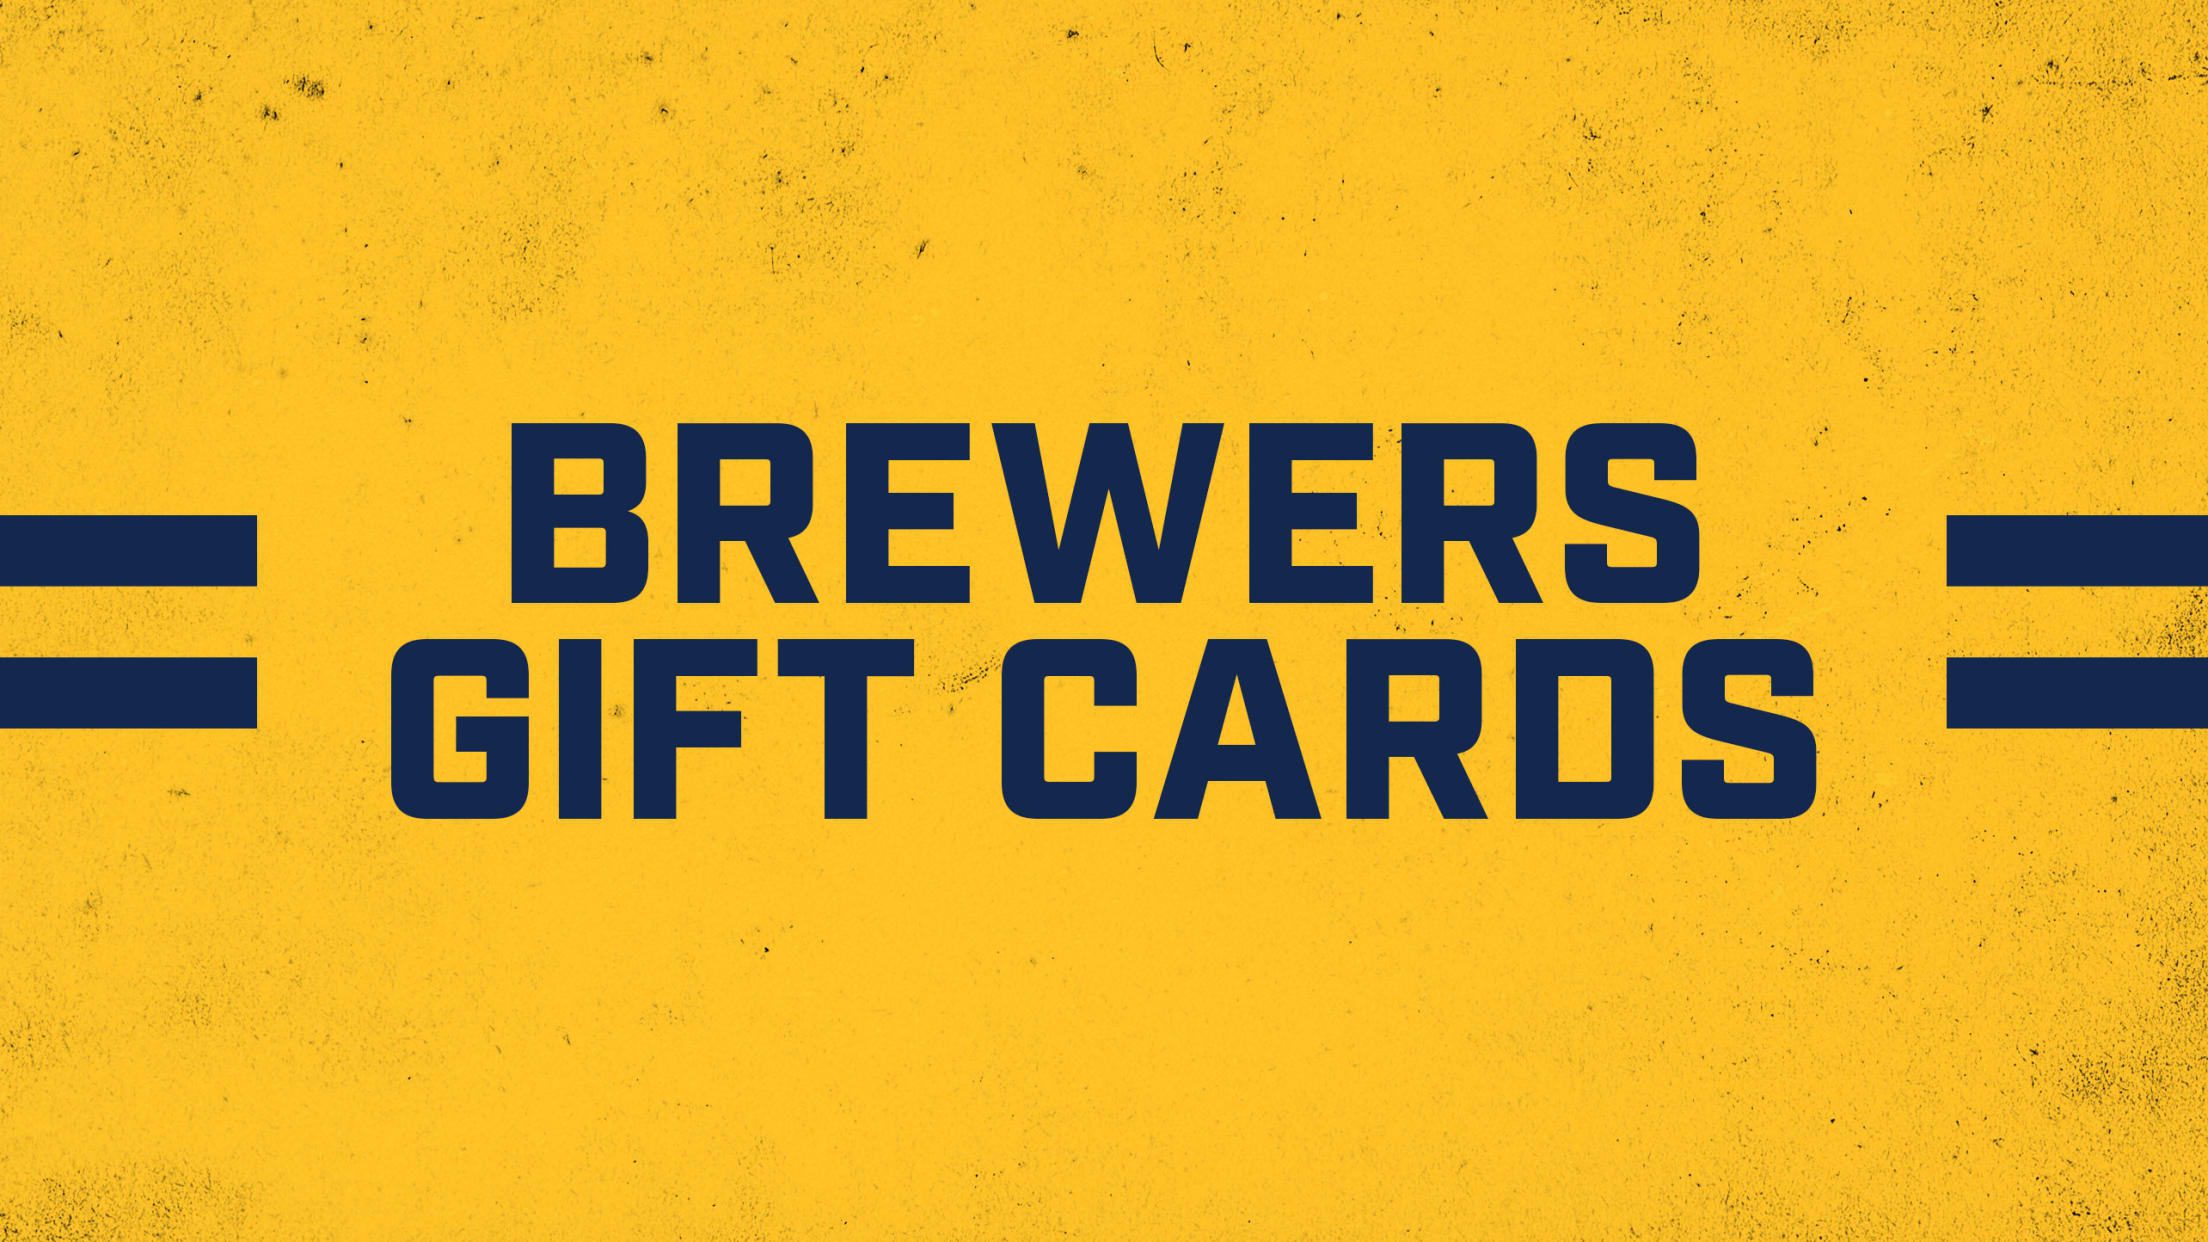 Milwaukee Brewers Mother's Day Gift Guide